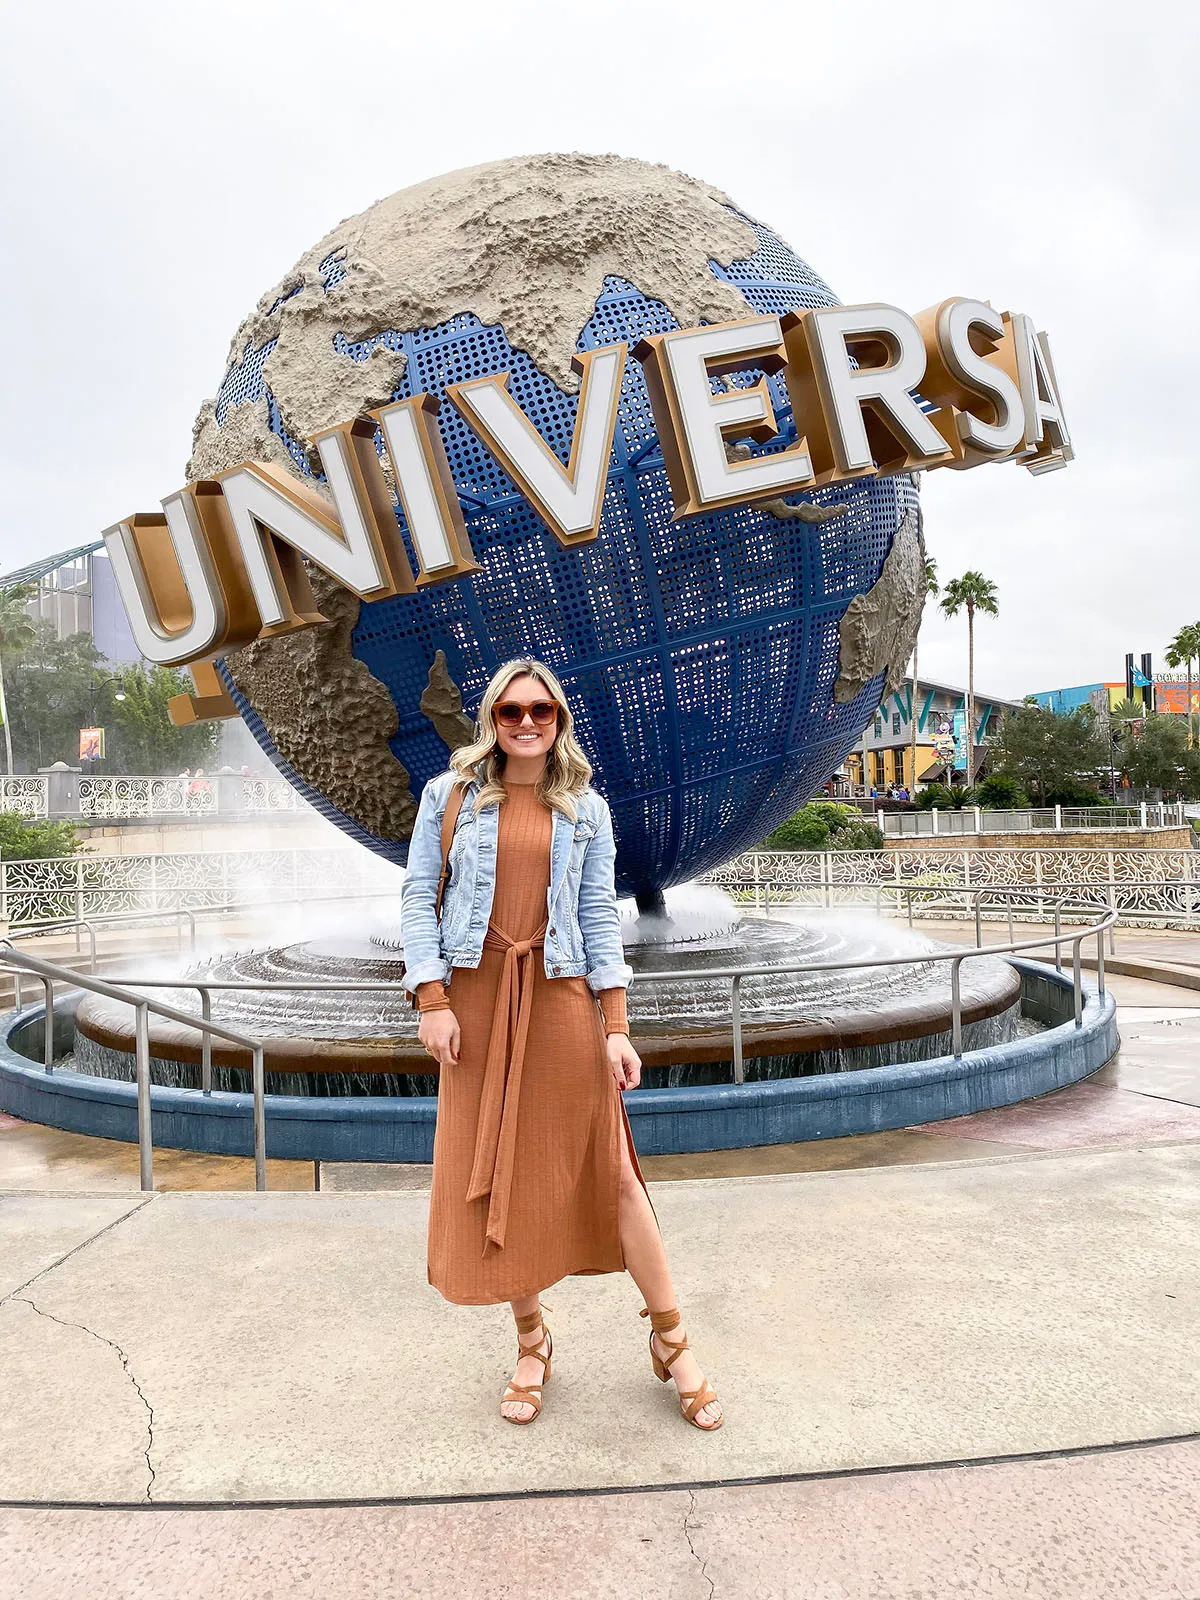 Can You Wear Sandals to Universal Studios